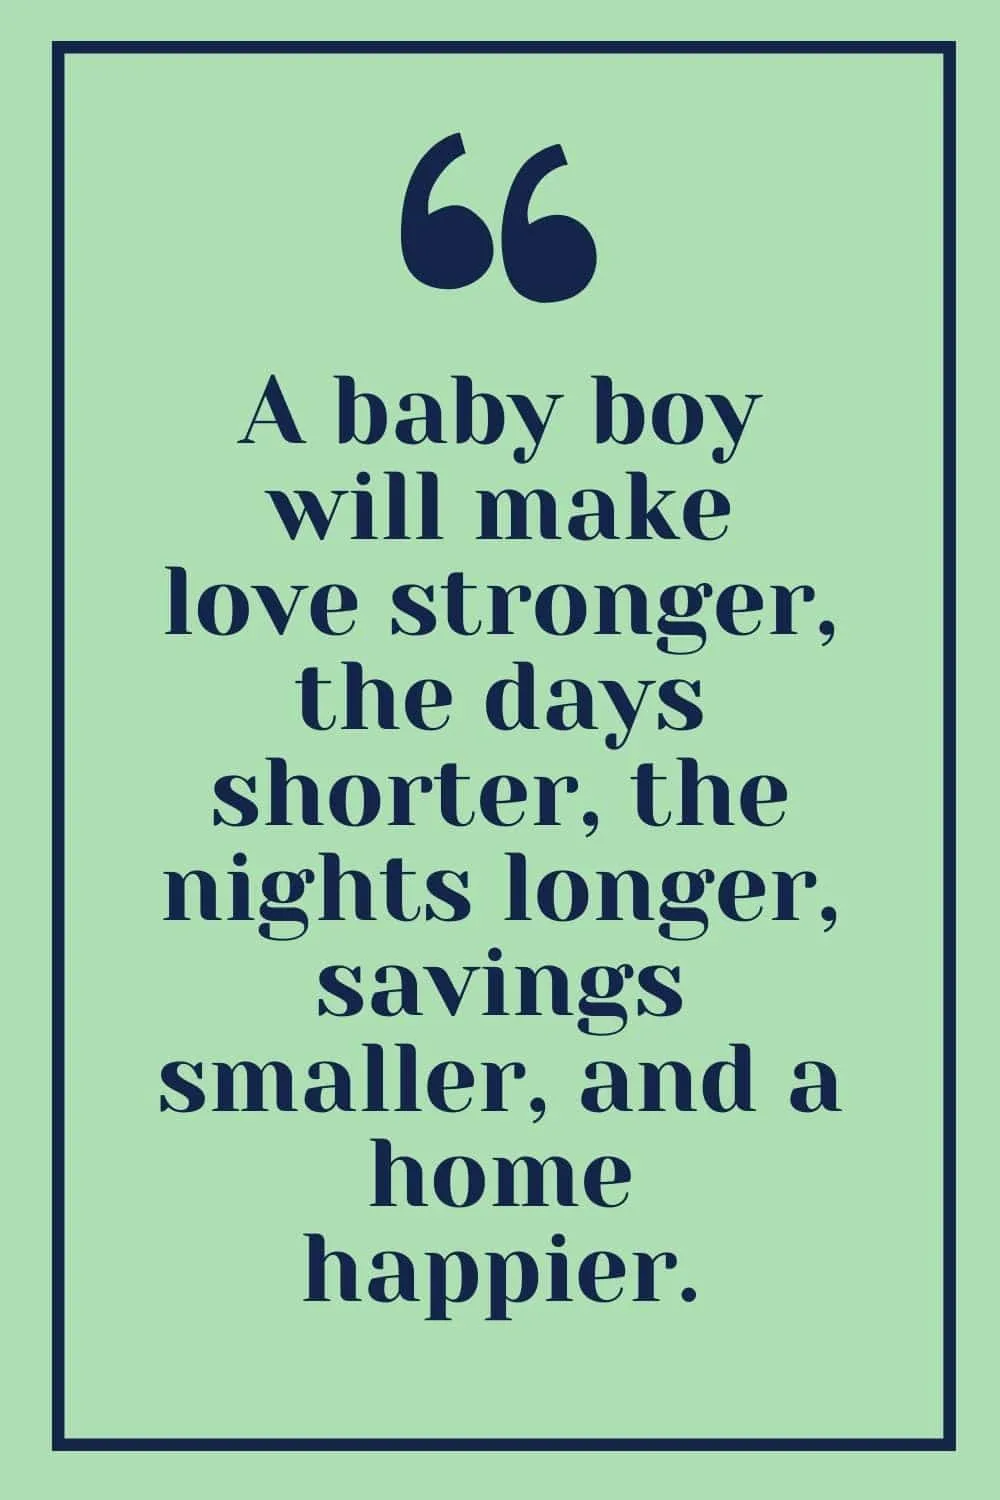 cute quotes about little boys